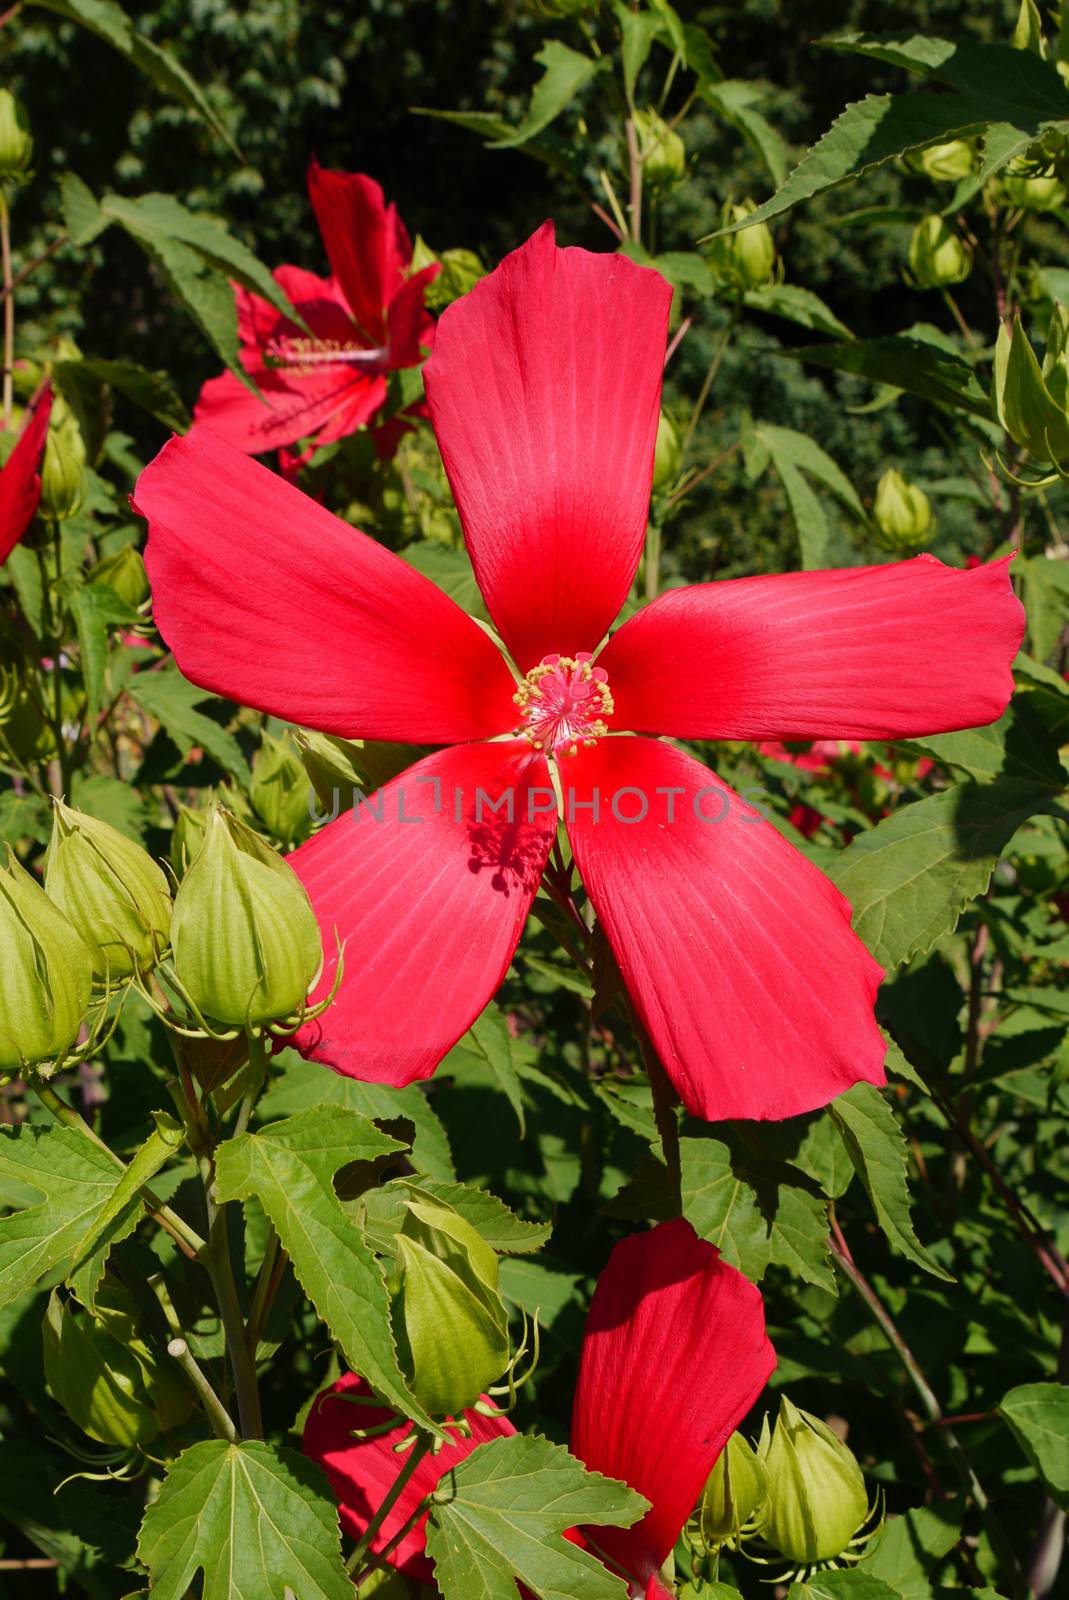 red flower in the form of a star and three unexplored buds by Adamchuk